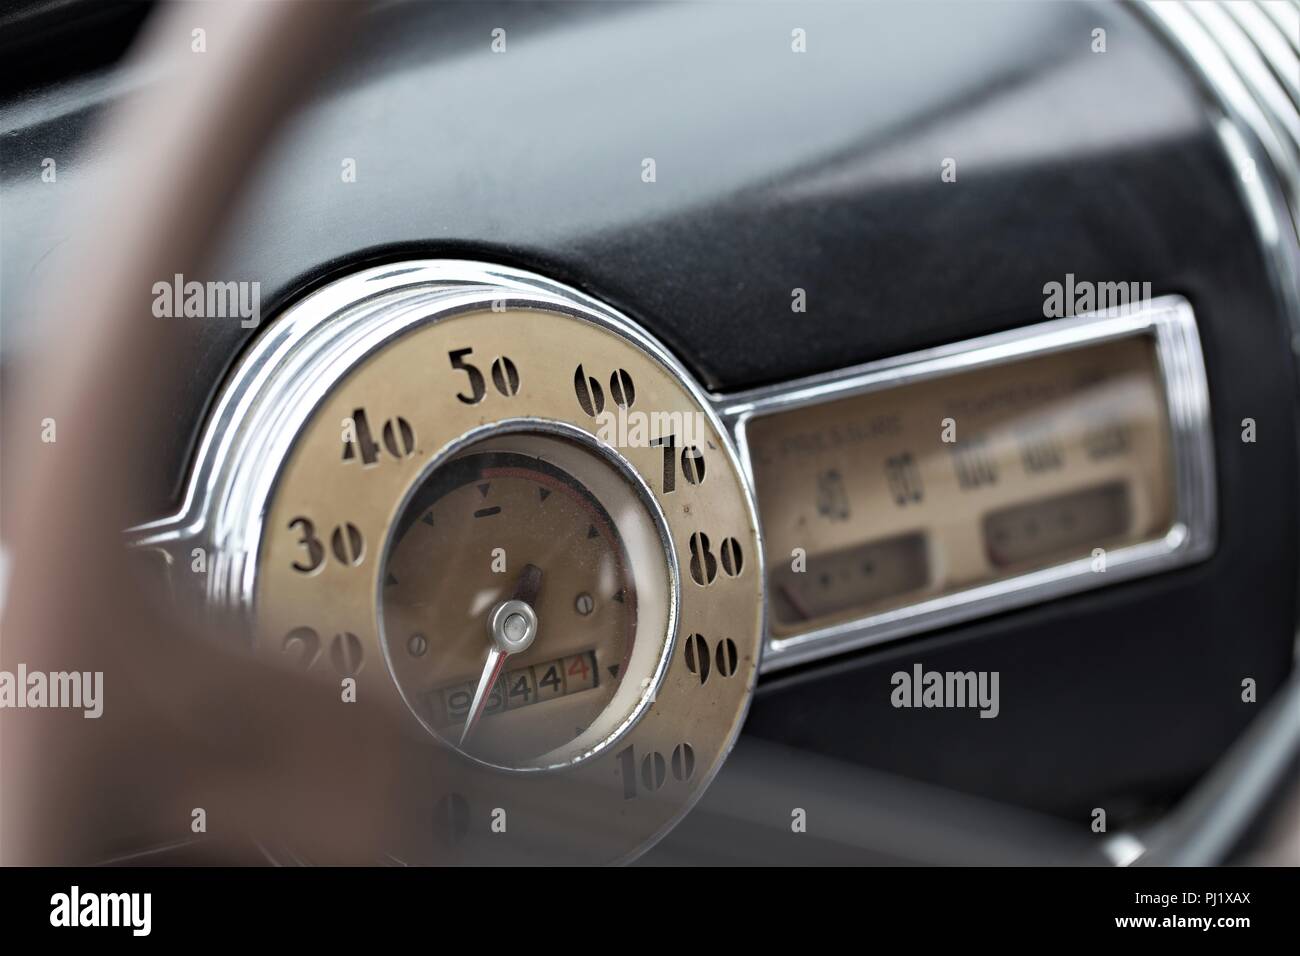 steering wheel in old car with focus on tachometer Stock Photo